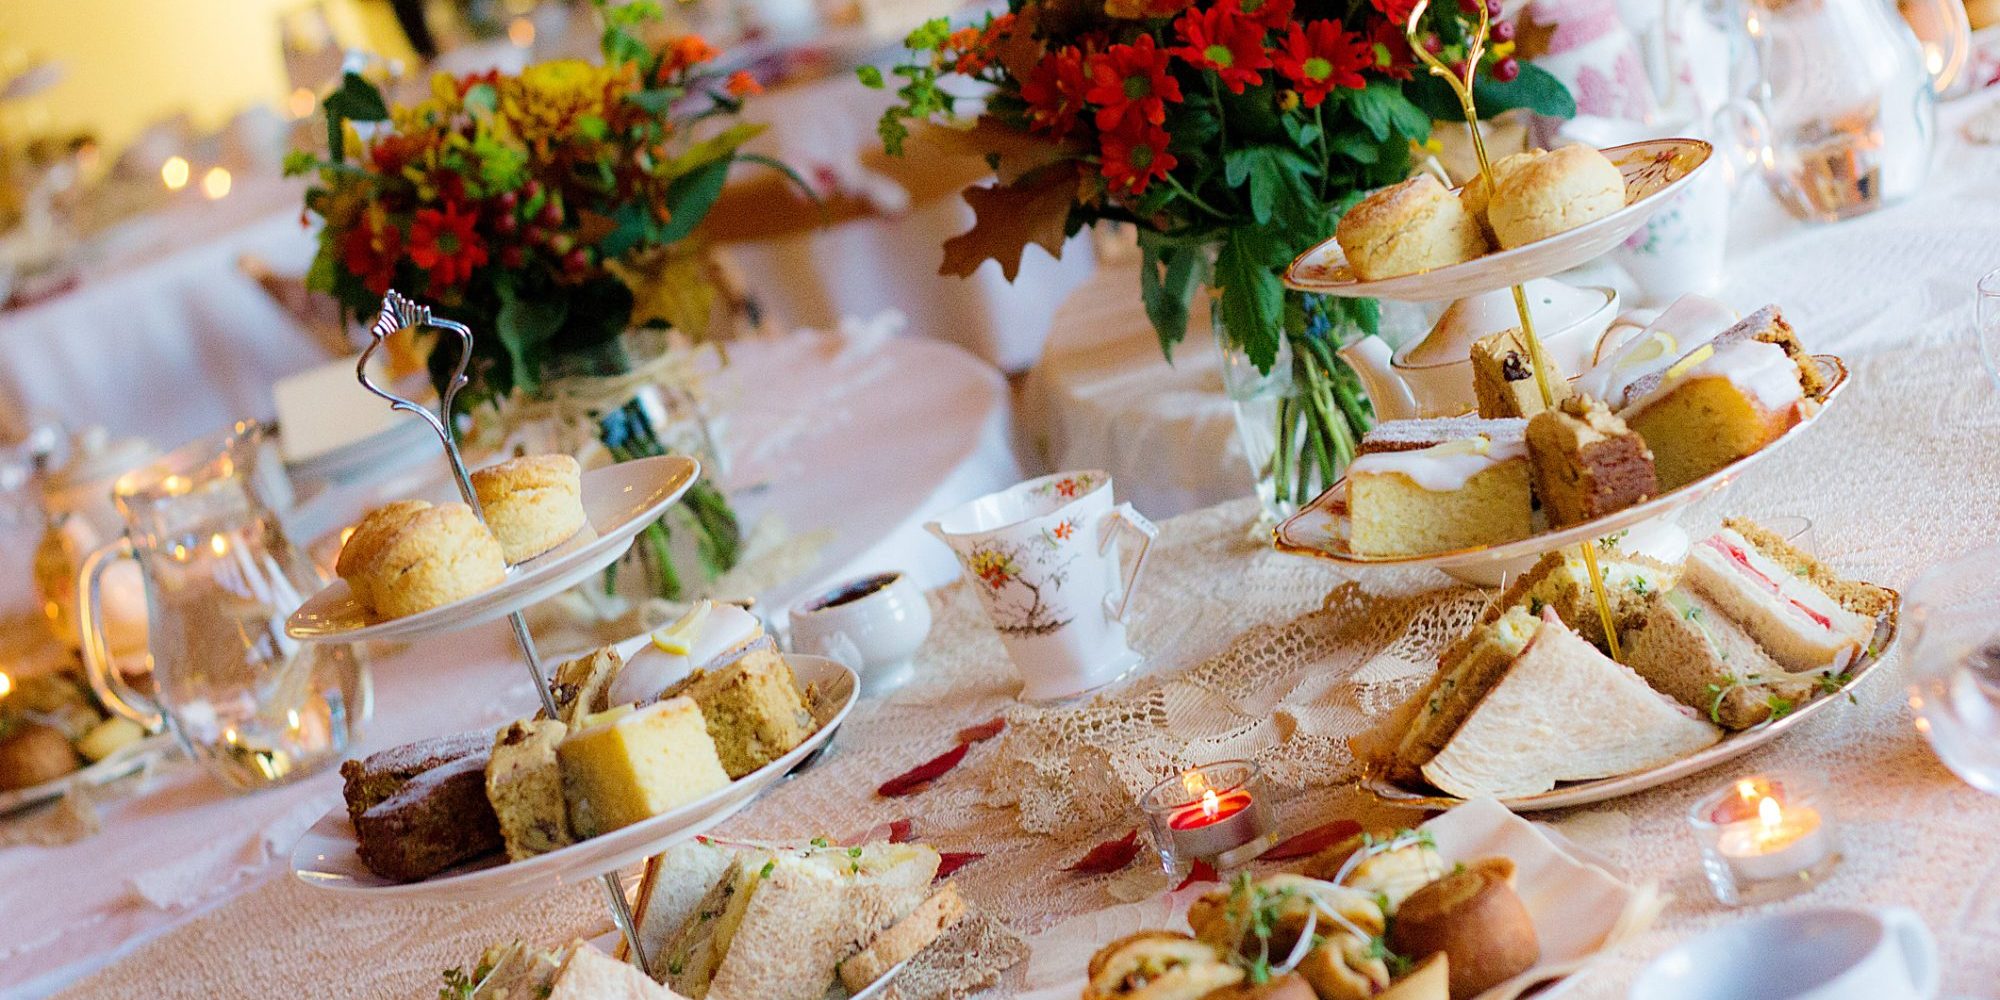 Afternoon tea service with, sandwiches, savory pastries and cakes.